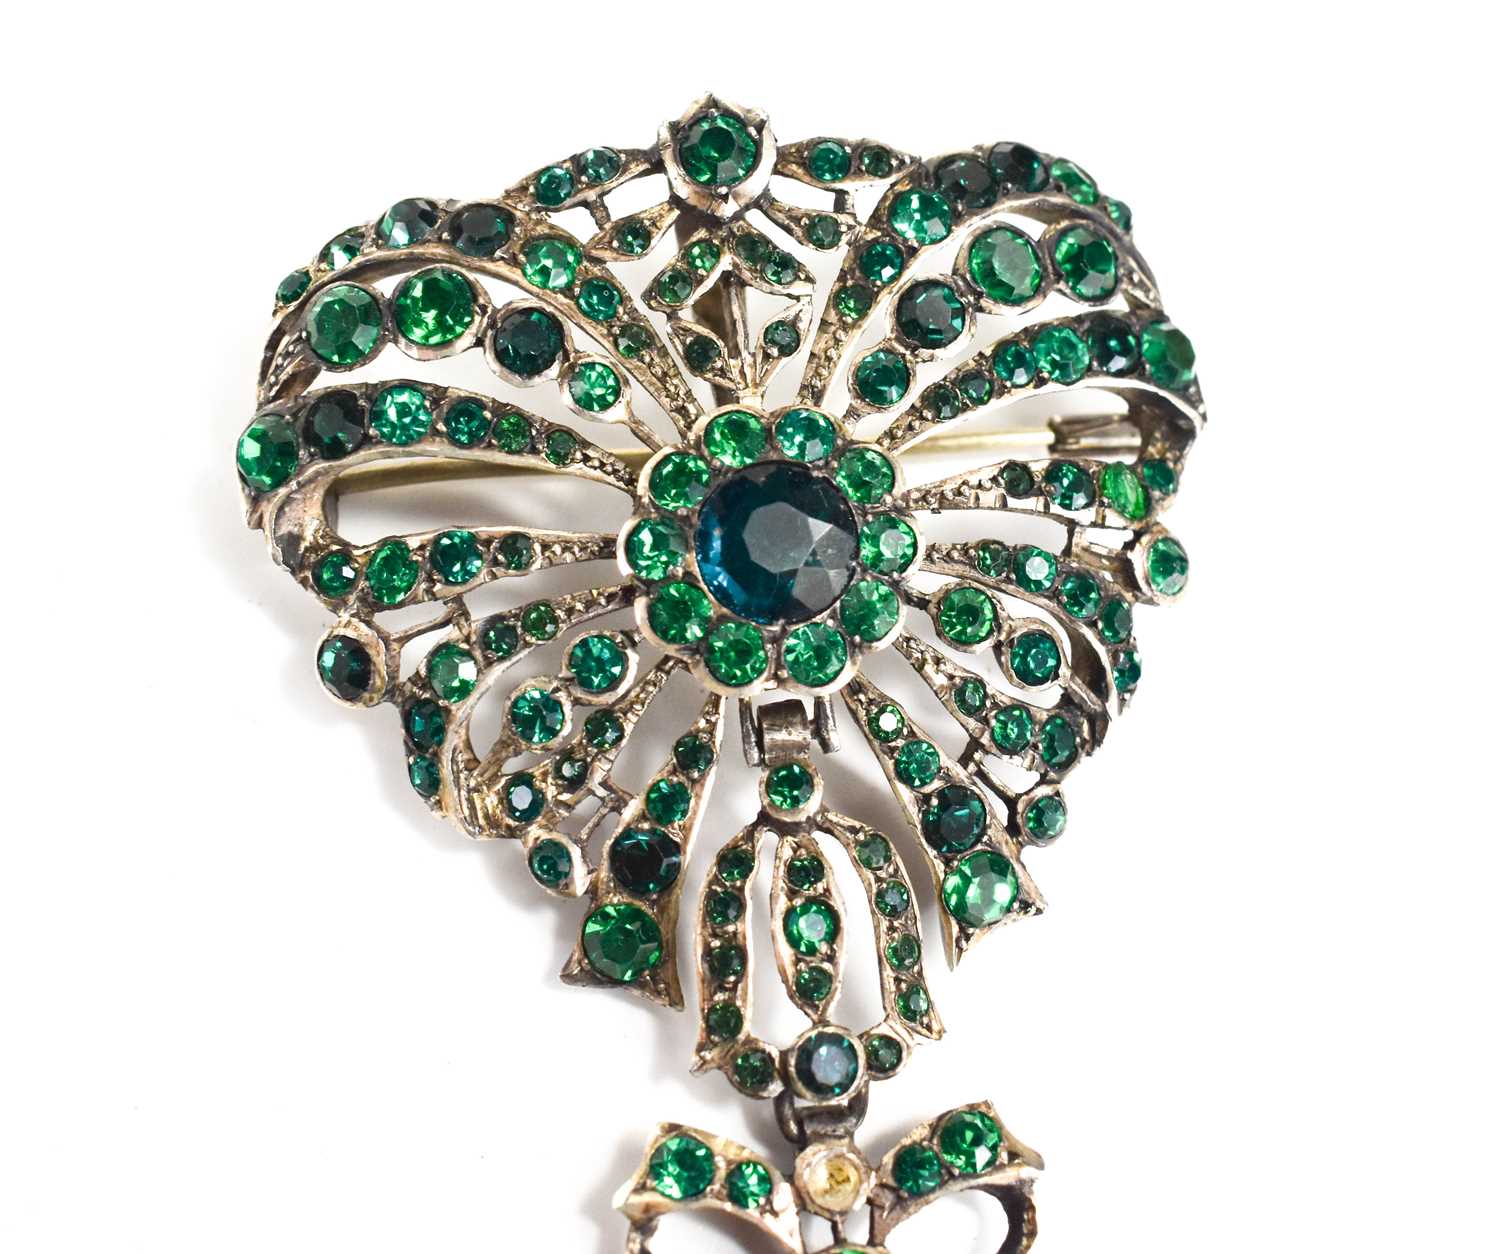 A 19th century French silver and green paste articulated bodice brooch pin, the brooch having a - Image 4 of 5